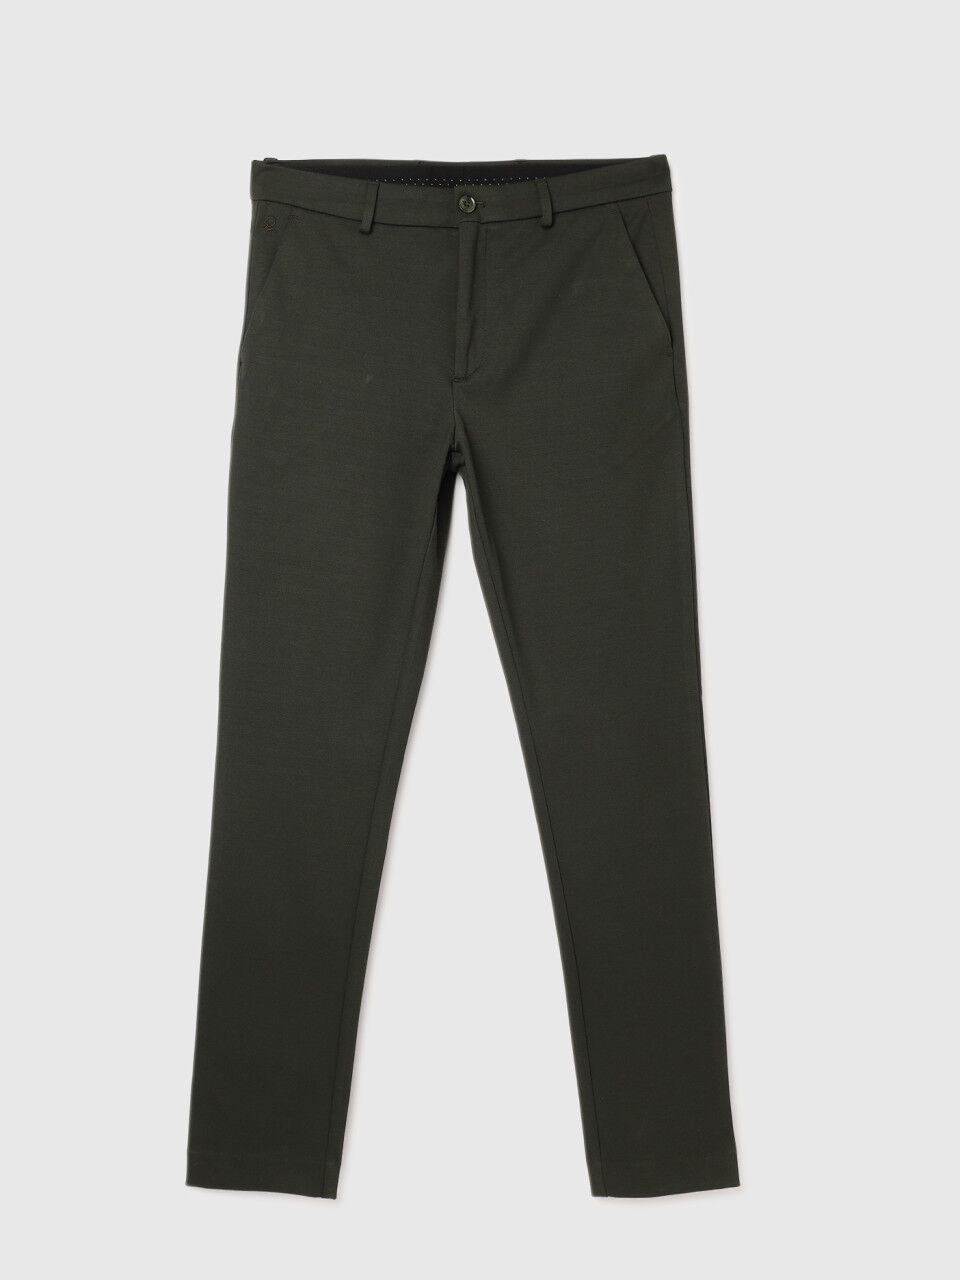 United Colors Of Benetton Mens Slim Fit Solid Trousers Buy United Colors  Of Benetton Mens Slim Fit Solid Trousers Online at Best Price in India   NykaaMan